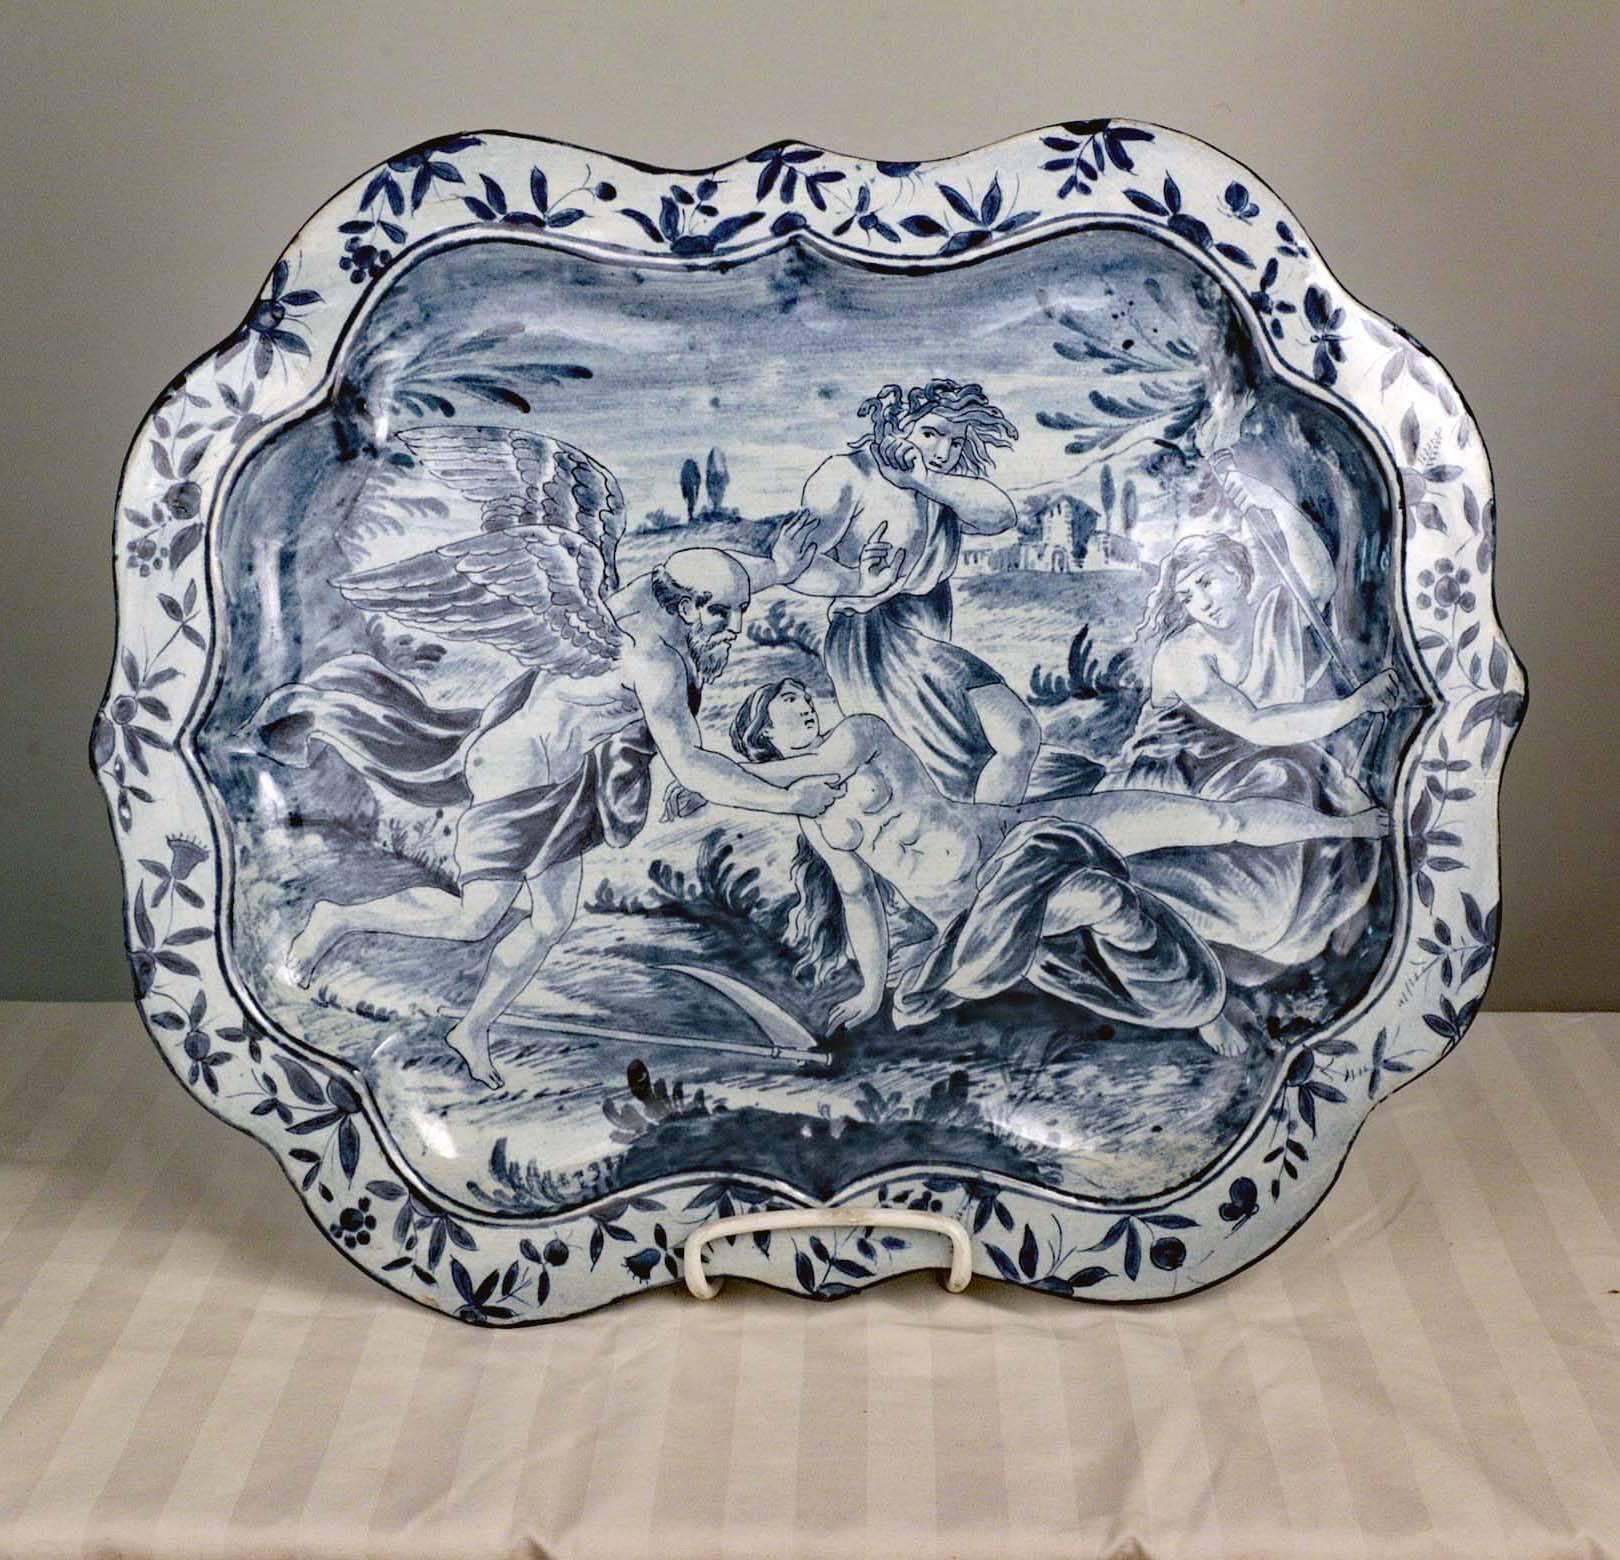 Antique pair of Savona Majolica serving dishes.  Painted in blue, one depicts a satyr, putti and two young girls, all enjoying the new wine: the other is painted with an allegory of time.
These charming meat plates were destined to be hung. They